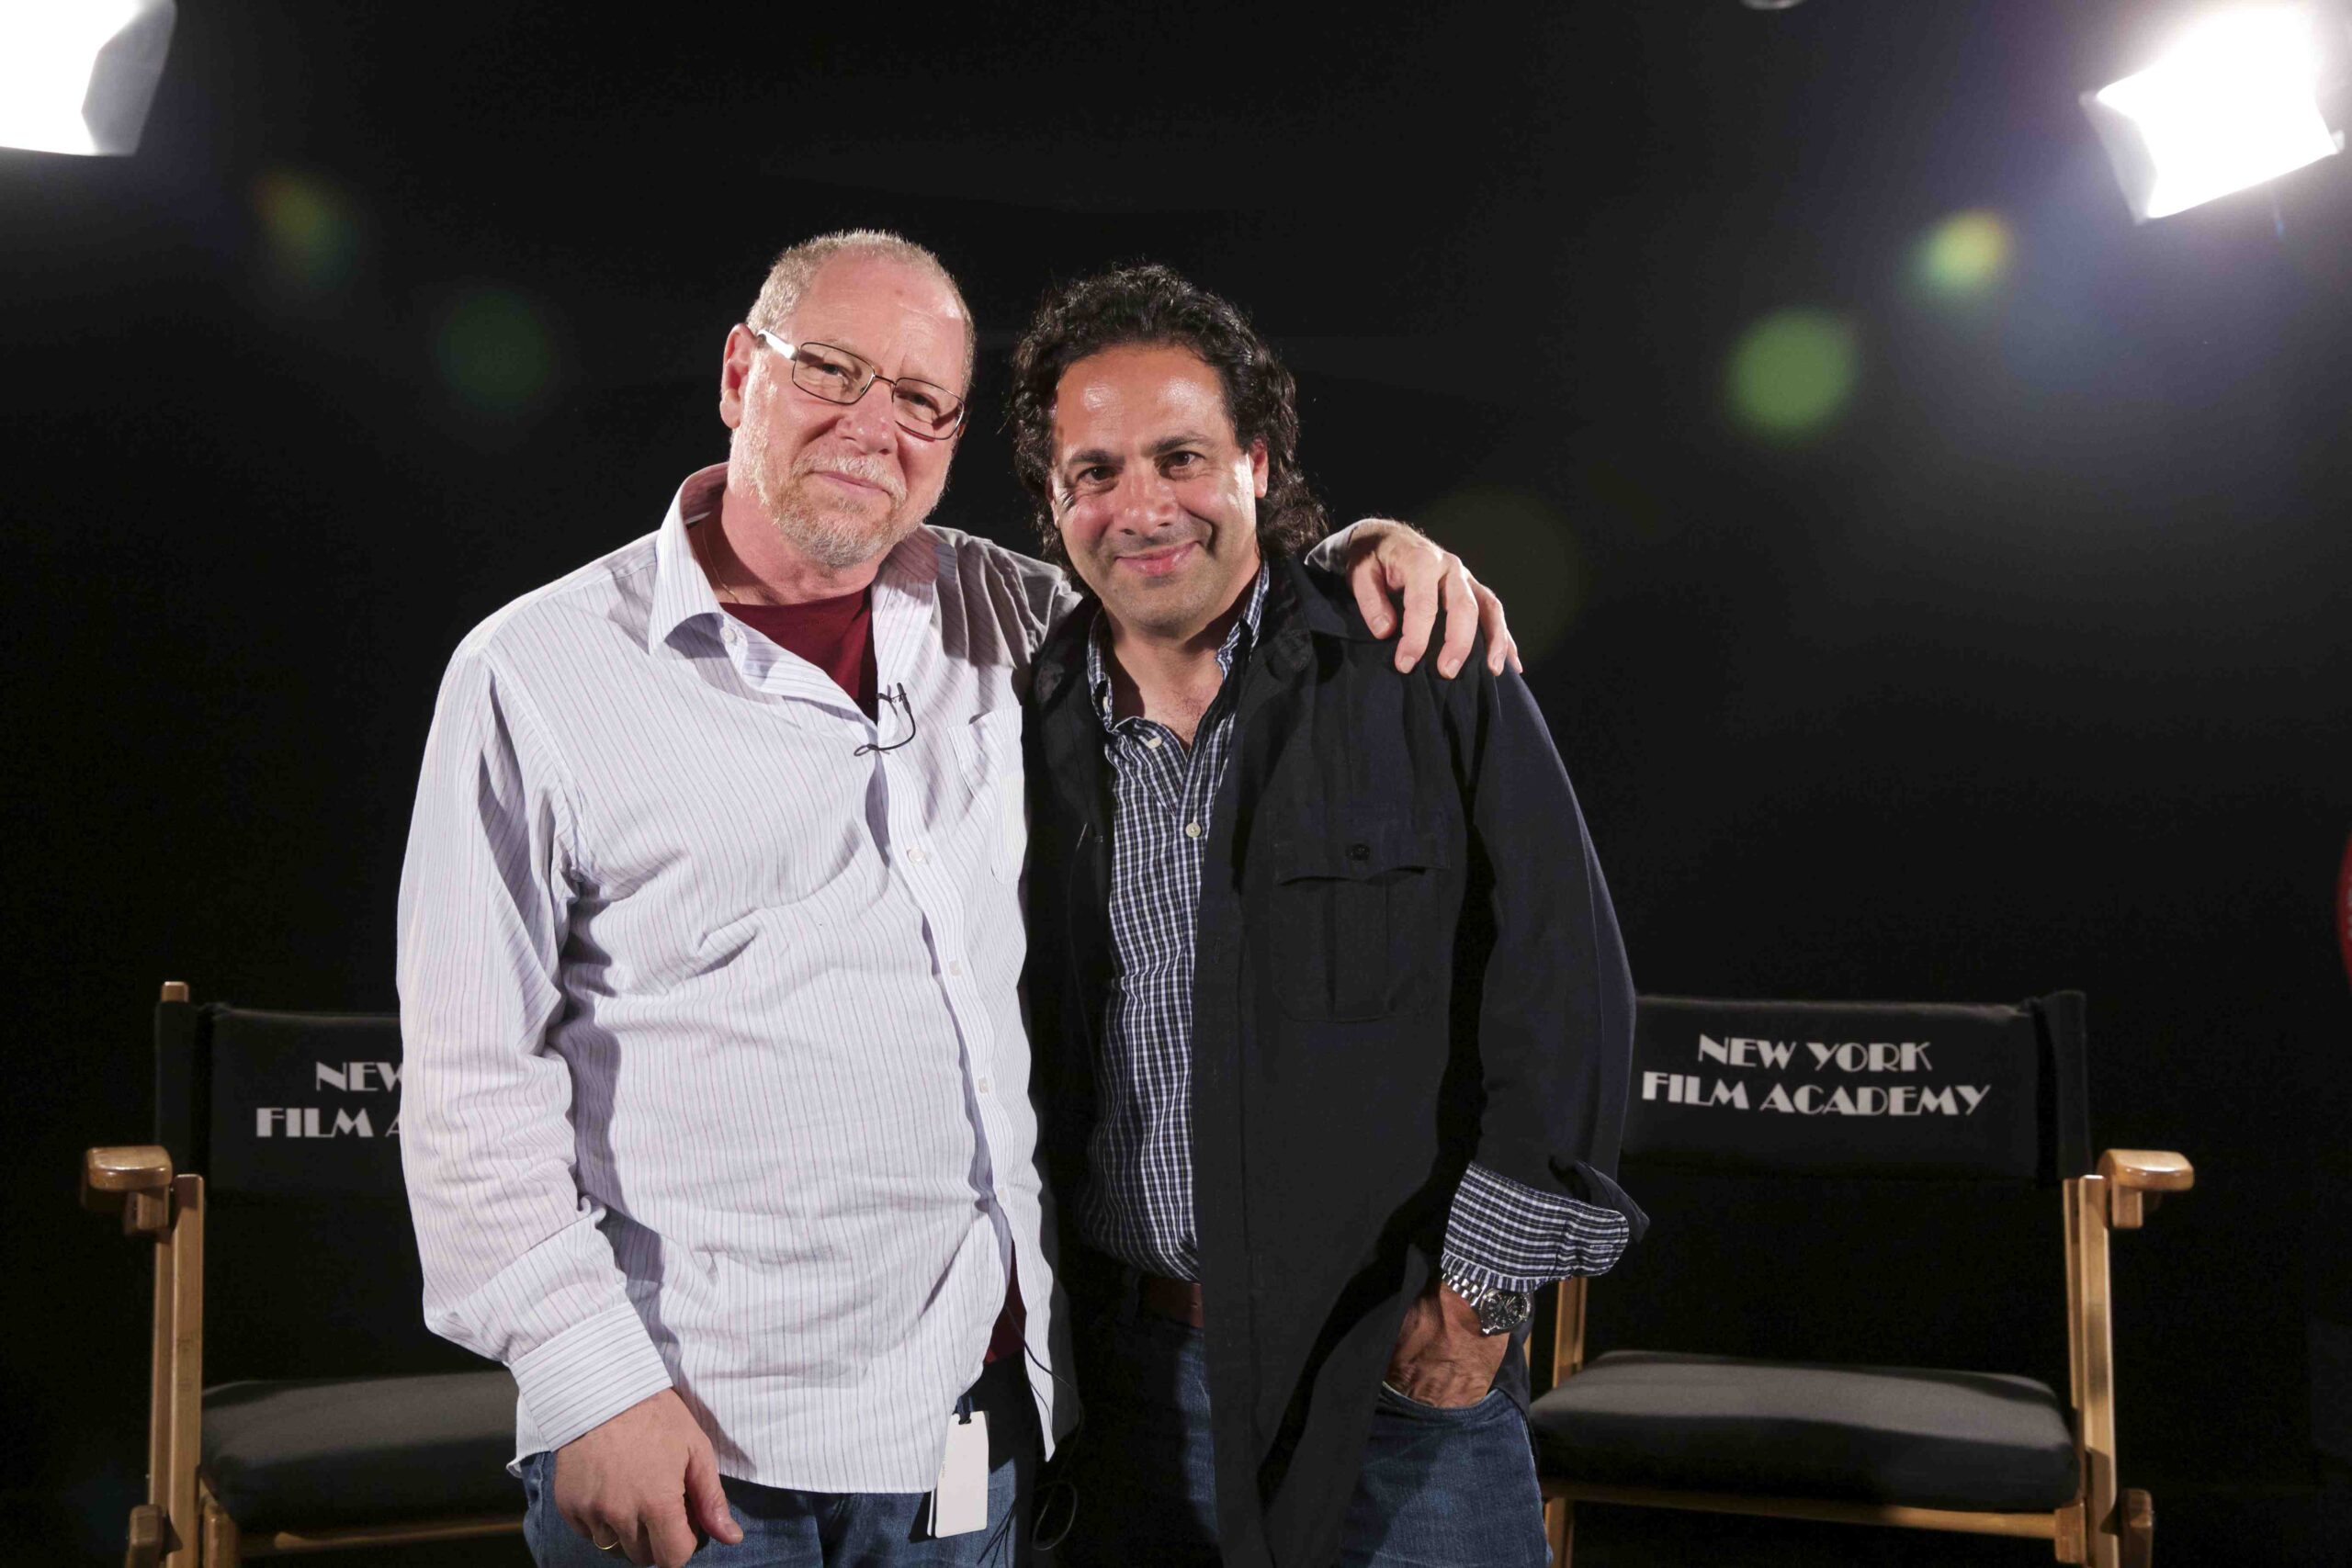 Tony Schwartz, NYFA Chair of Producing, worked with Gabe on "Freaks and Geeks"